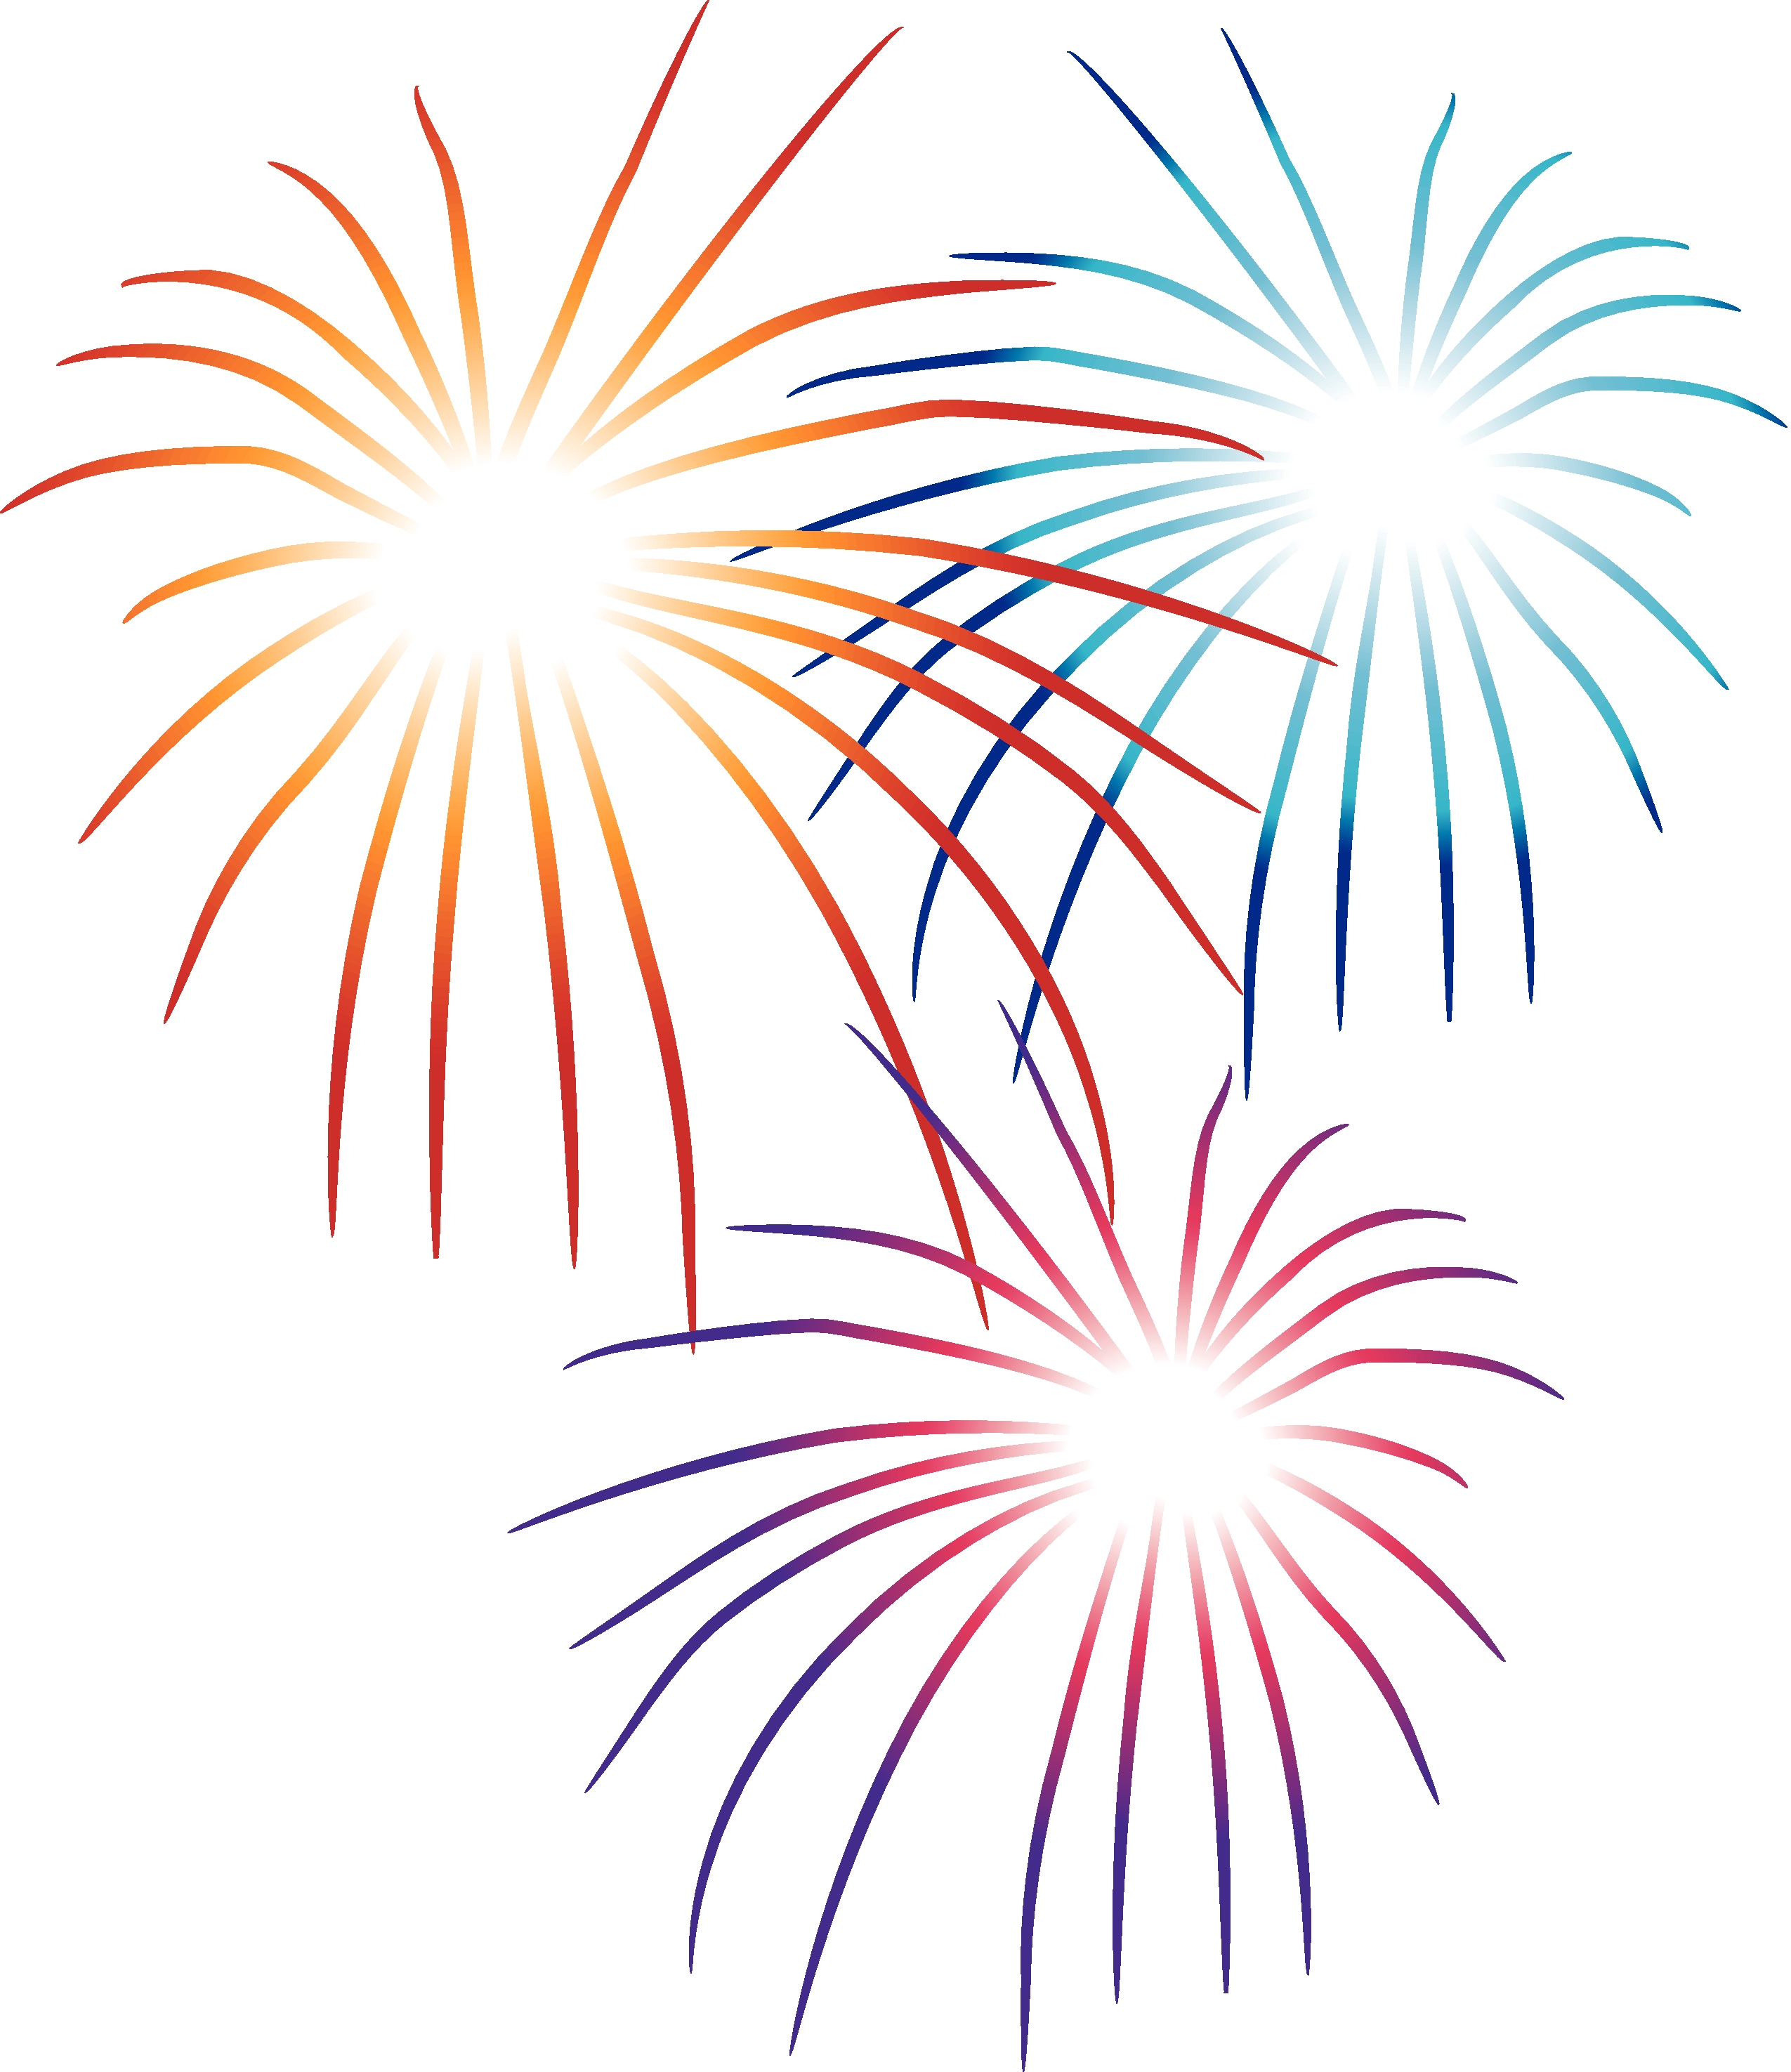 1125 New Years Eve free clipart.